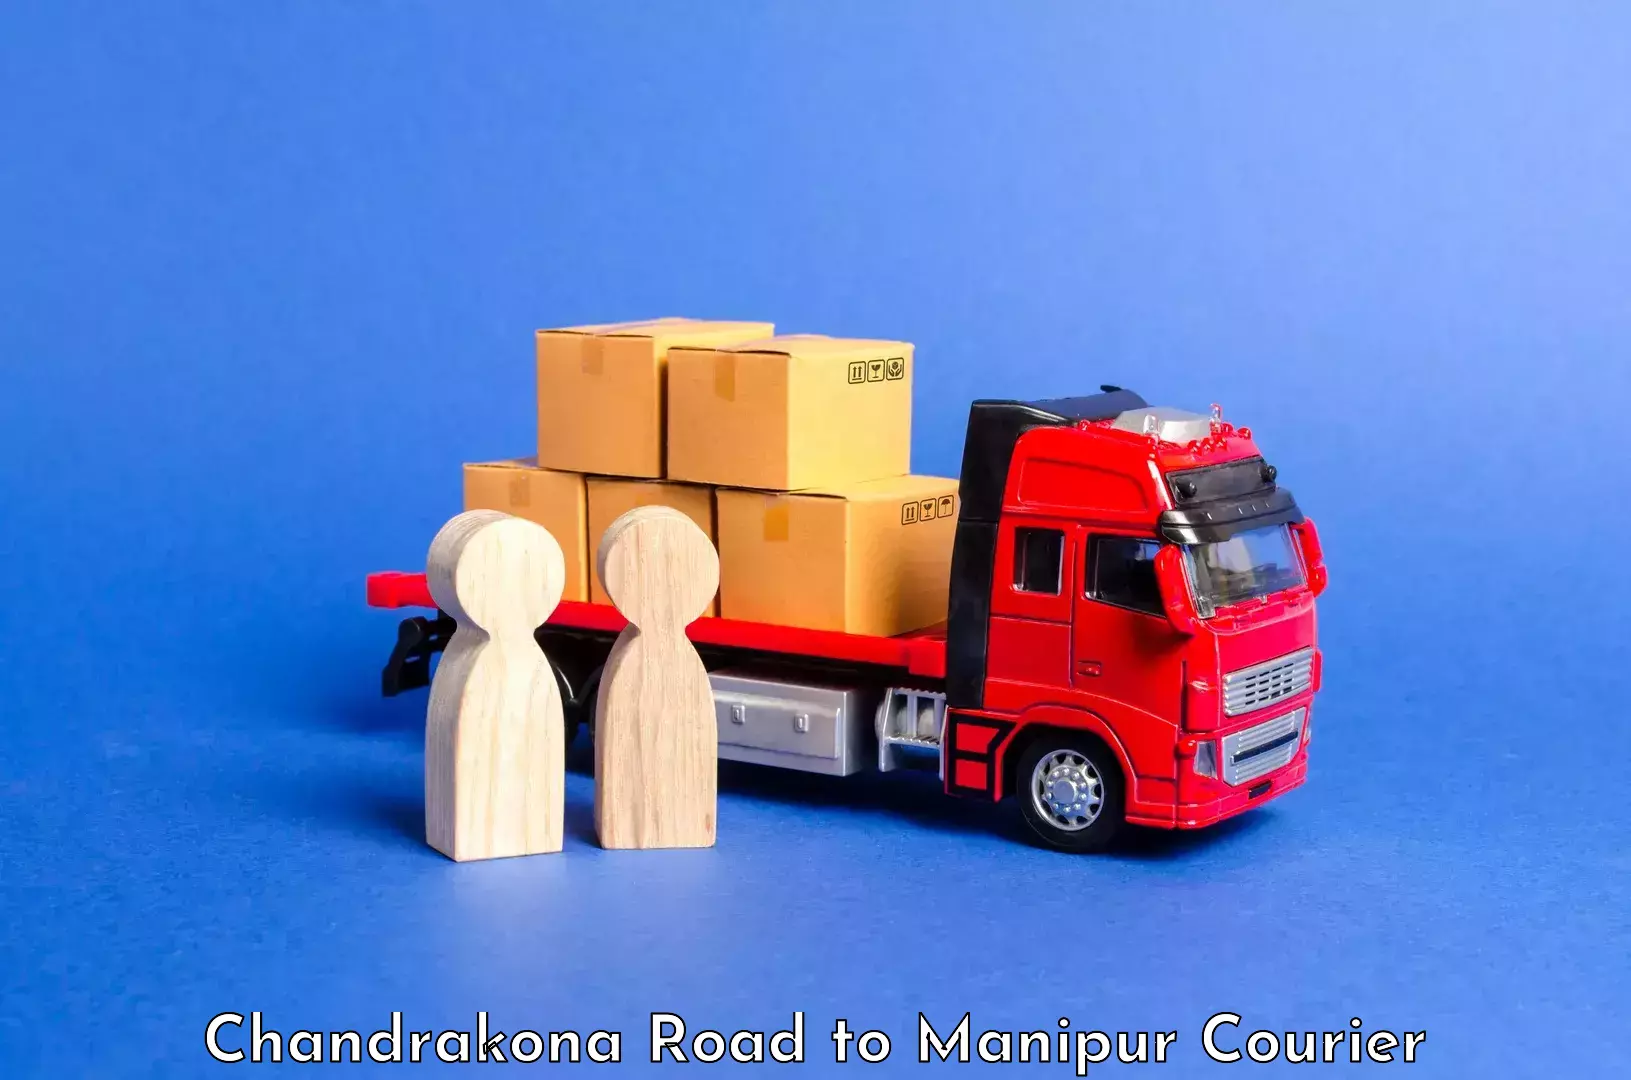 Holiday season luggage delivery Chandrakona Road to Manipur